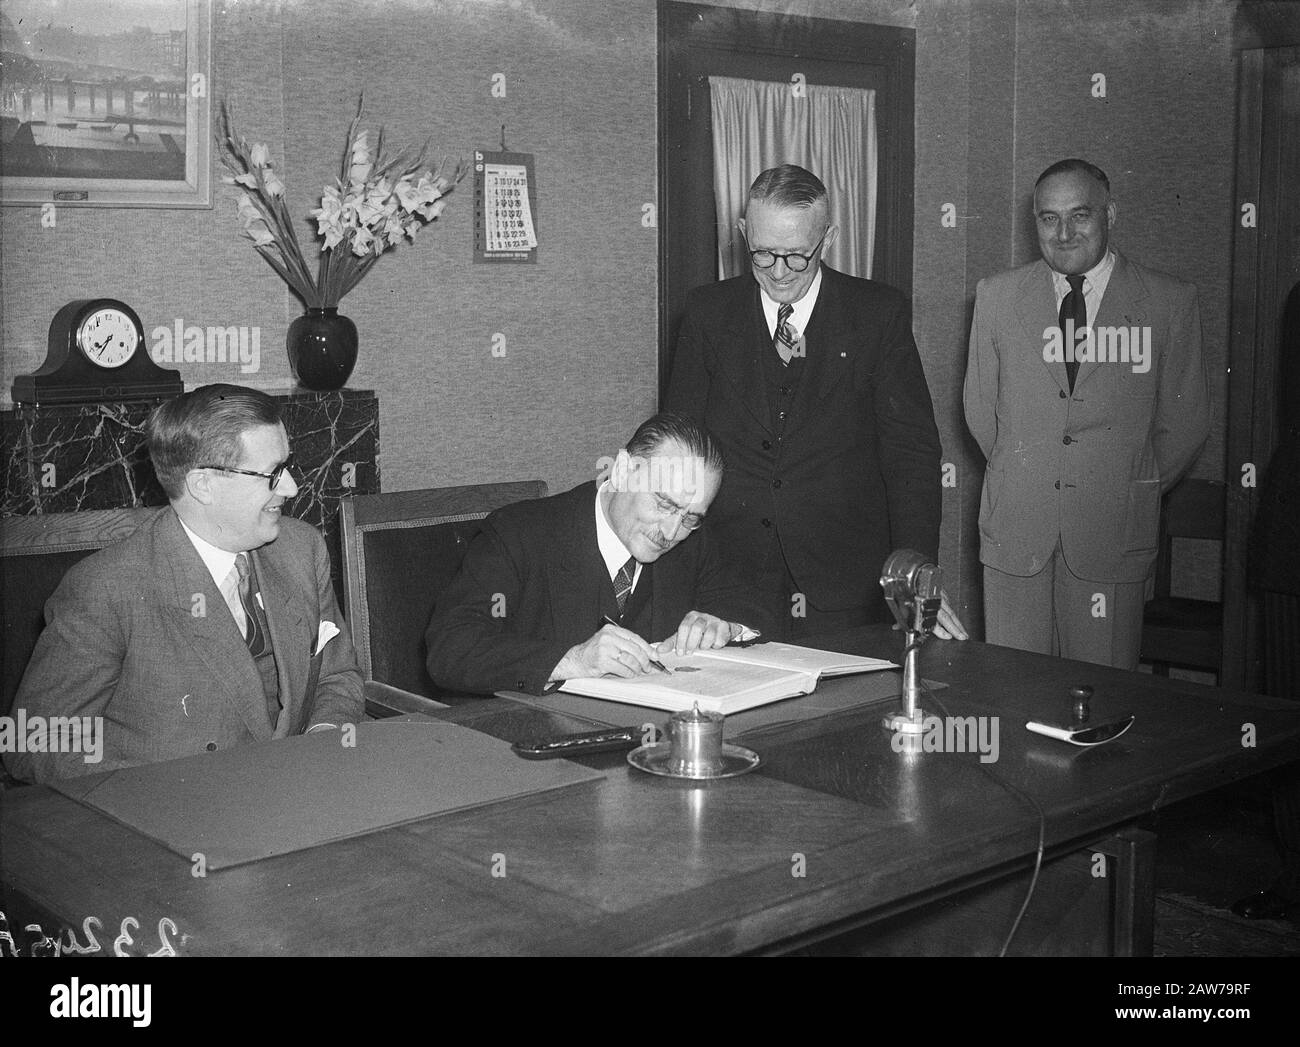 Social Affairs Minister Willem Drees signs Wederzijdigheid Social Insurance Treaty between Belgium and the Netherlands. Left the Belgian Minister of him L.E. Troclet Date: August 29, 1947 Location: The Hague Keywords: signatures, international agreements, ministers Person Name: Drees, Willem (sr.), Troclet. L. E. Stock Photo